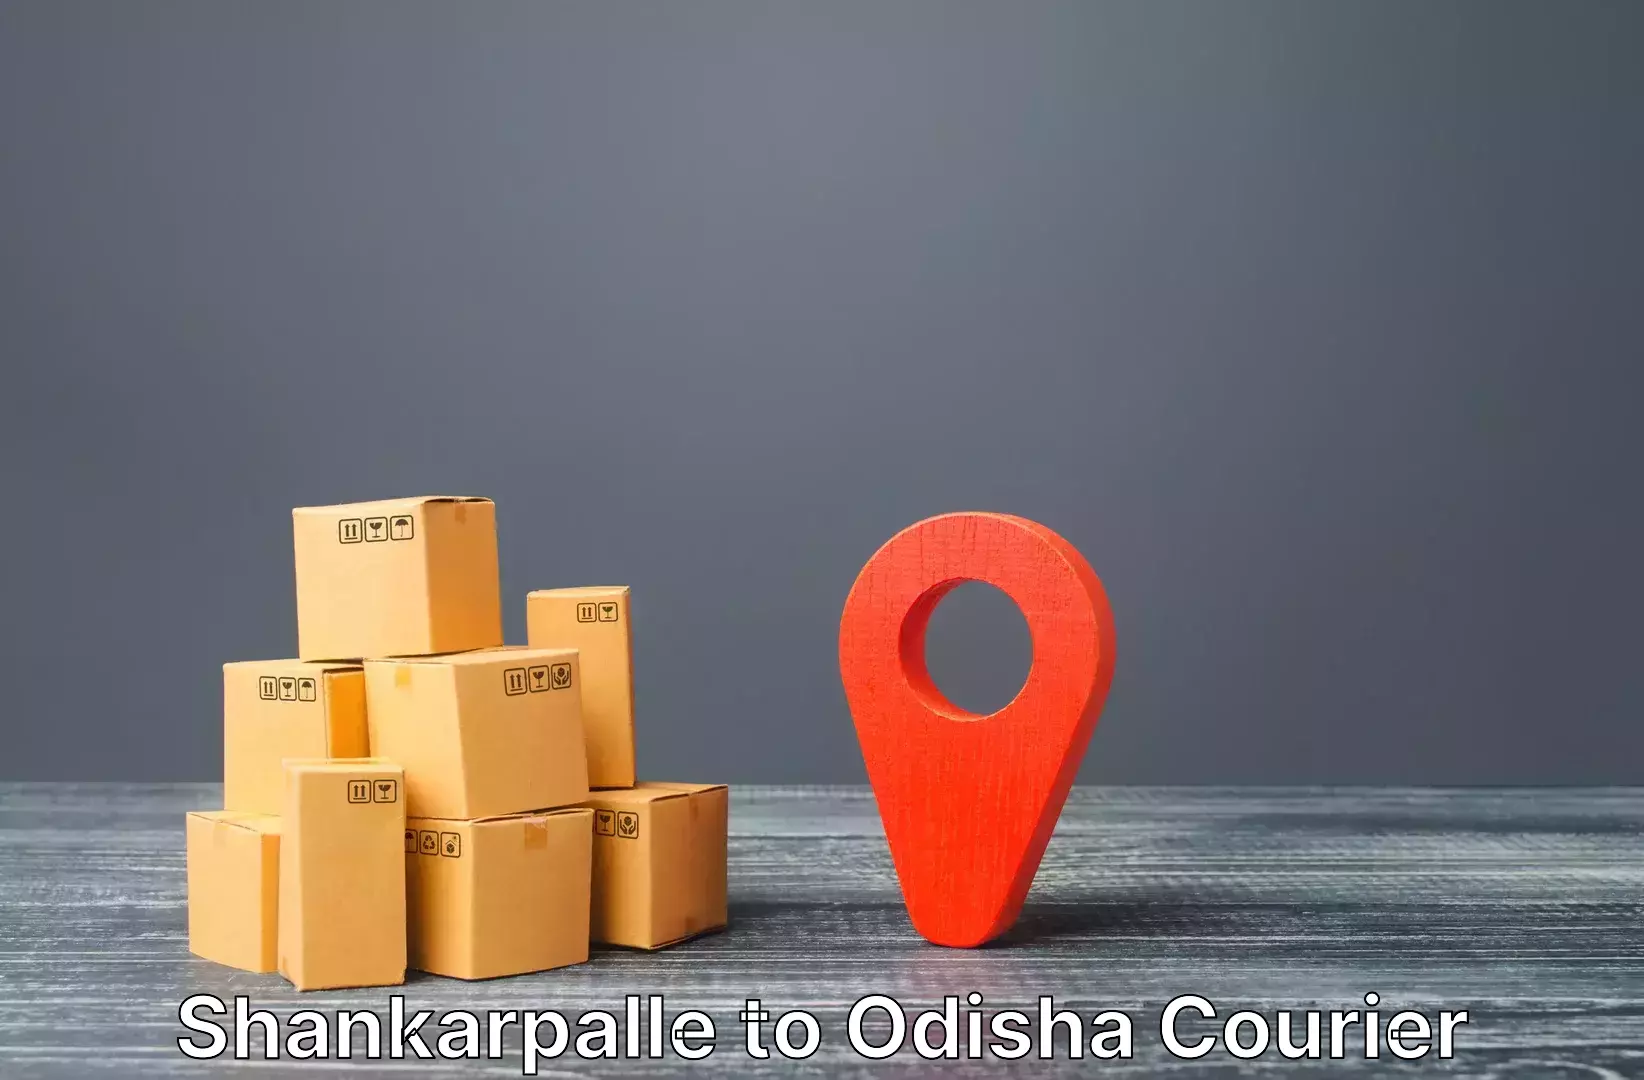 Luggage delivery system Shankarpalle to Gunupur